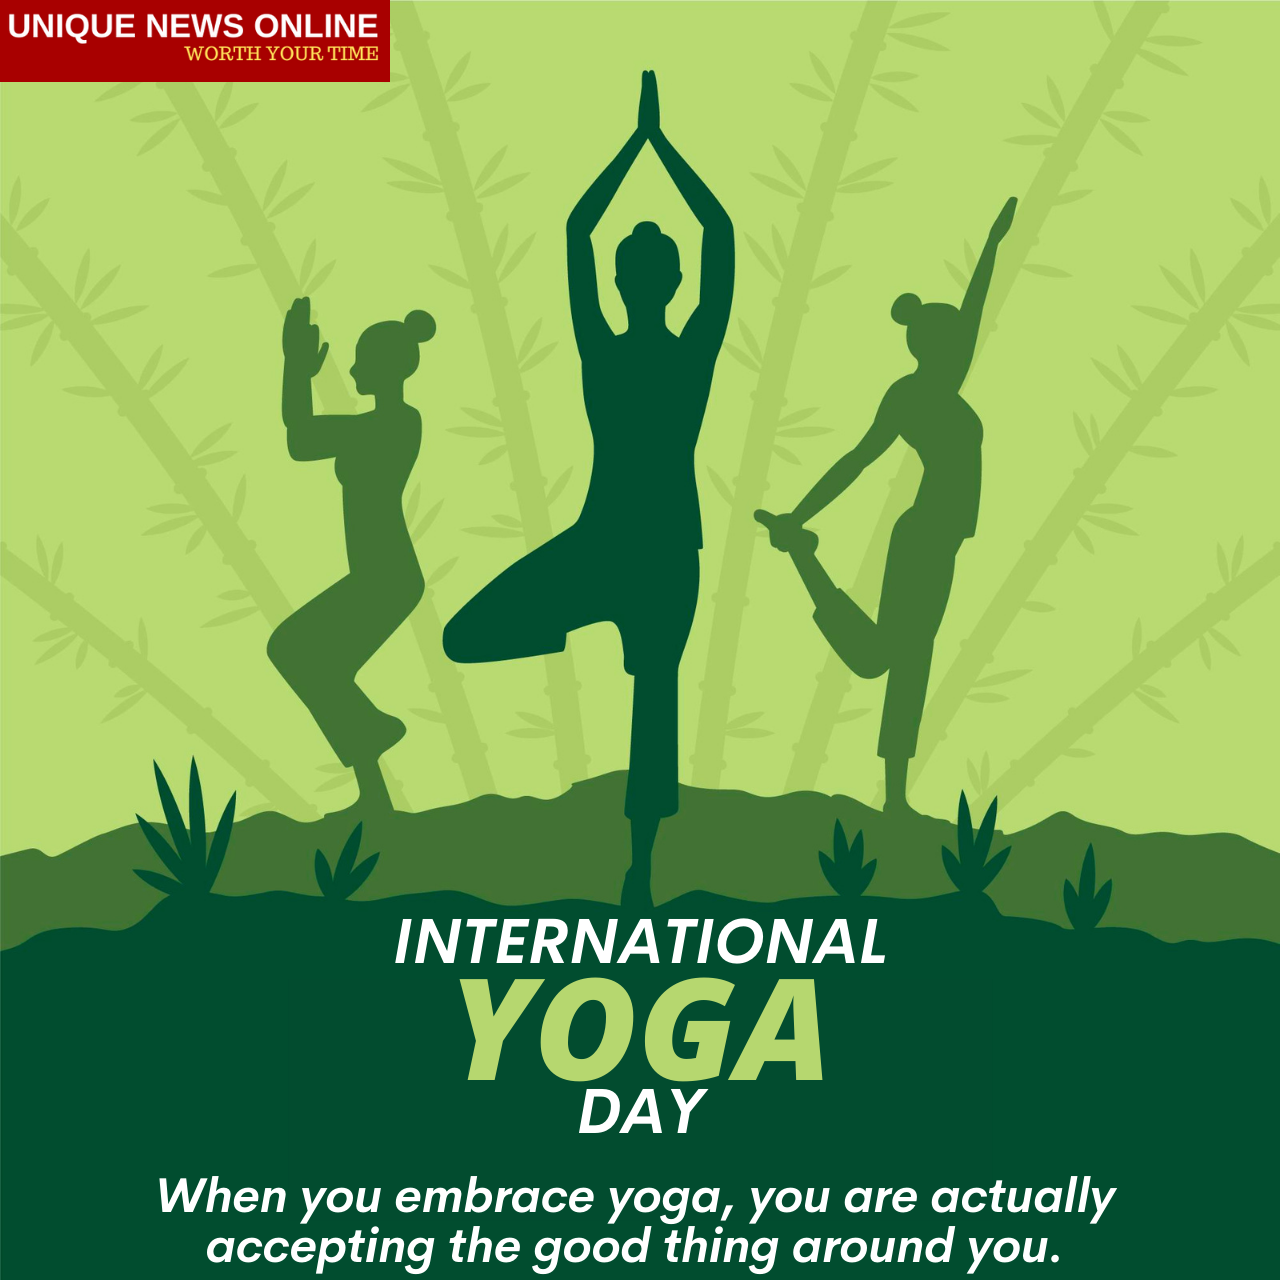 International Day of Yoga 2021: Wishes, Images (Photos), Poster, Messages, Quotes, Status, and Greetings to Celebrate Yoga Day